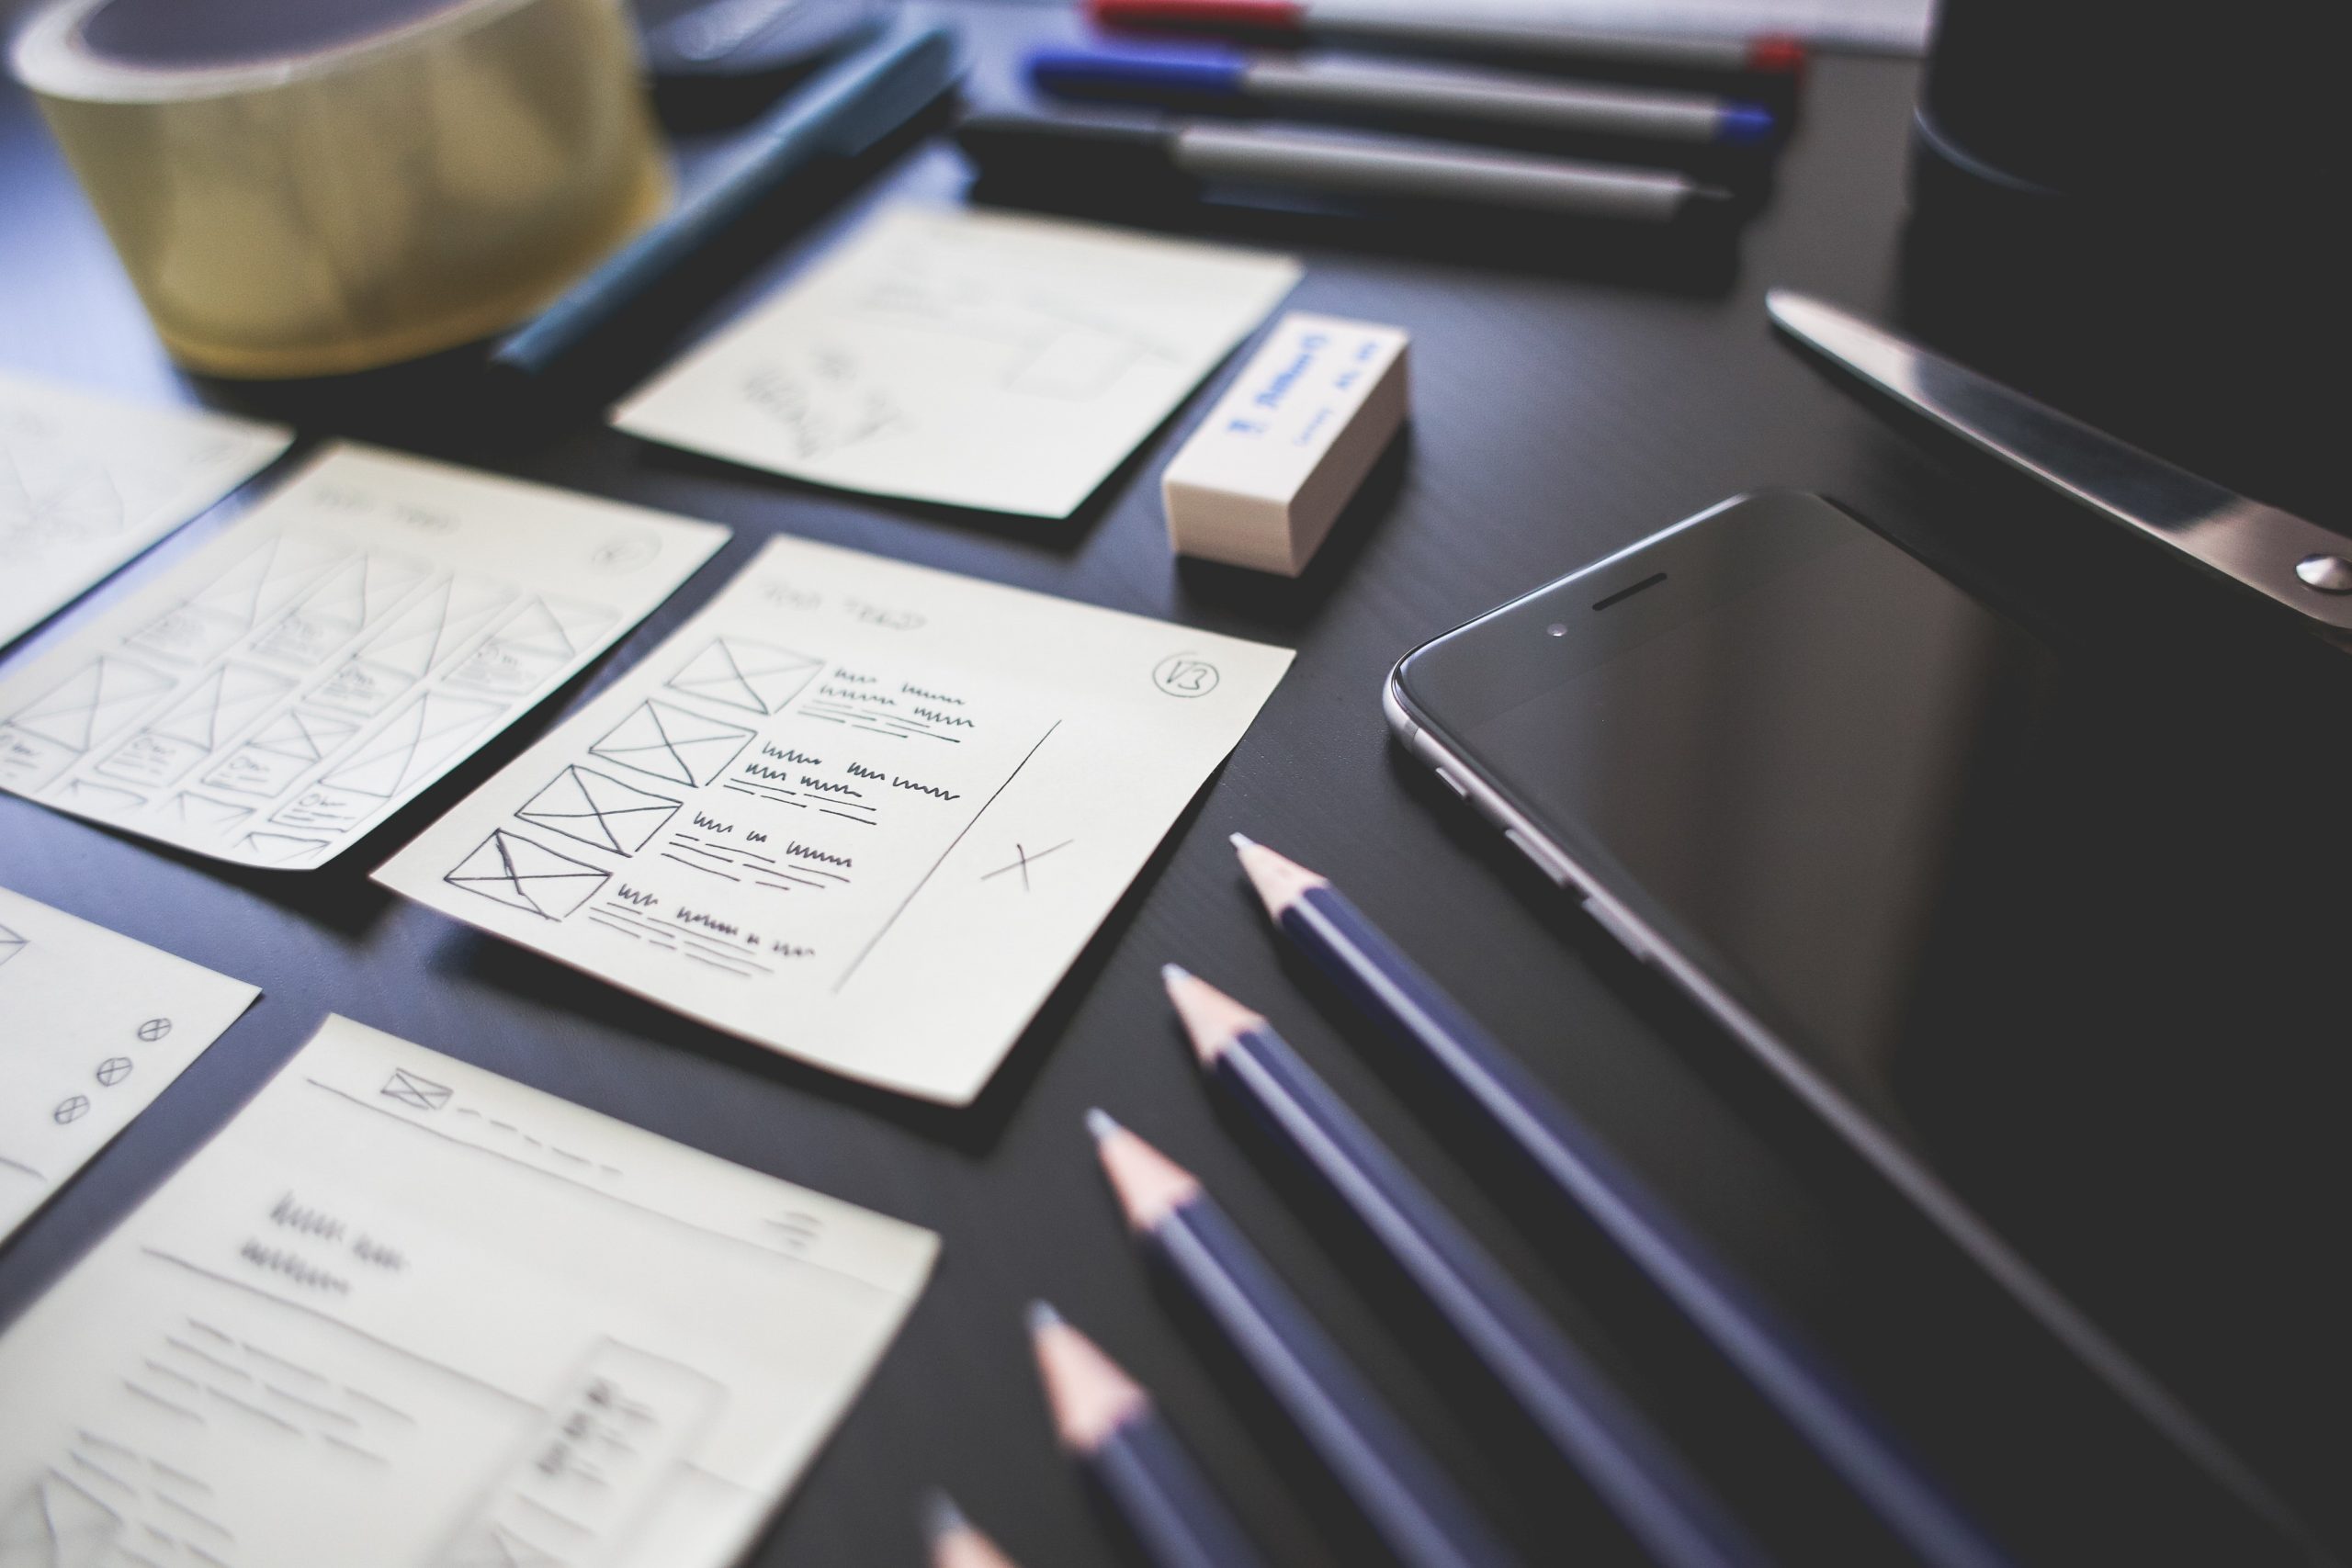 UX and UI Design Blog: A black desk full of notebooks and pens with UX design in the making